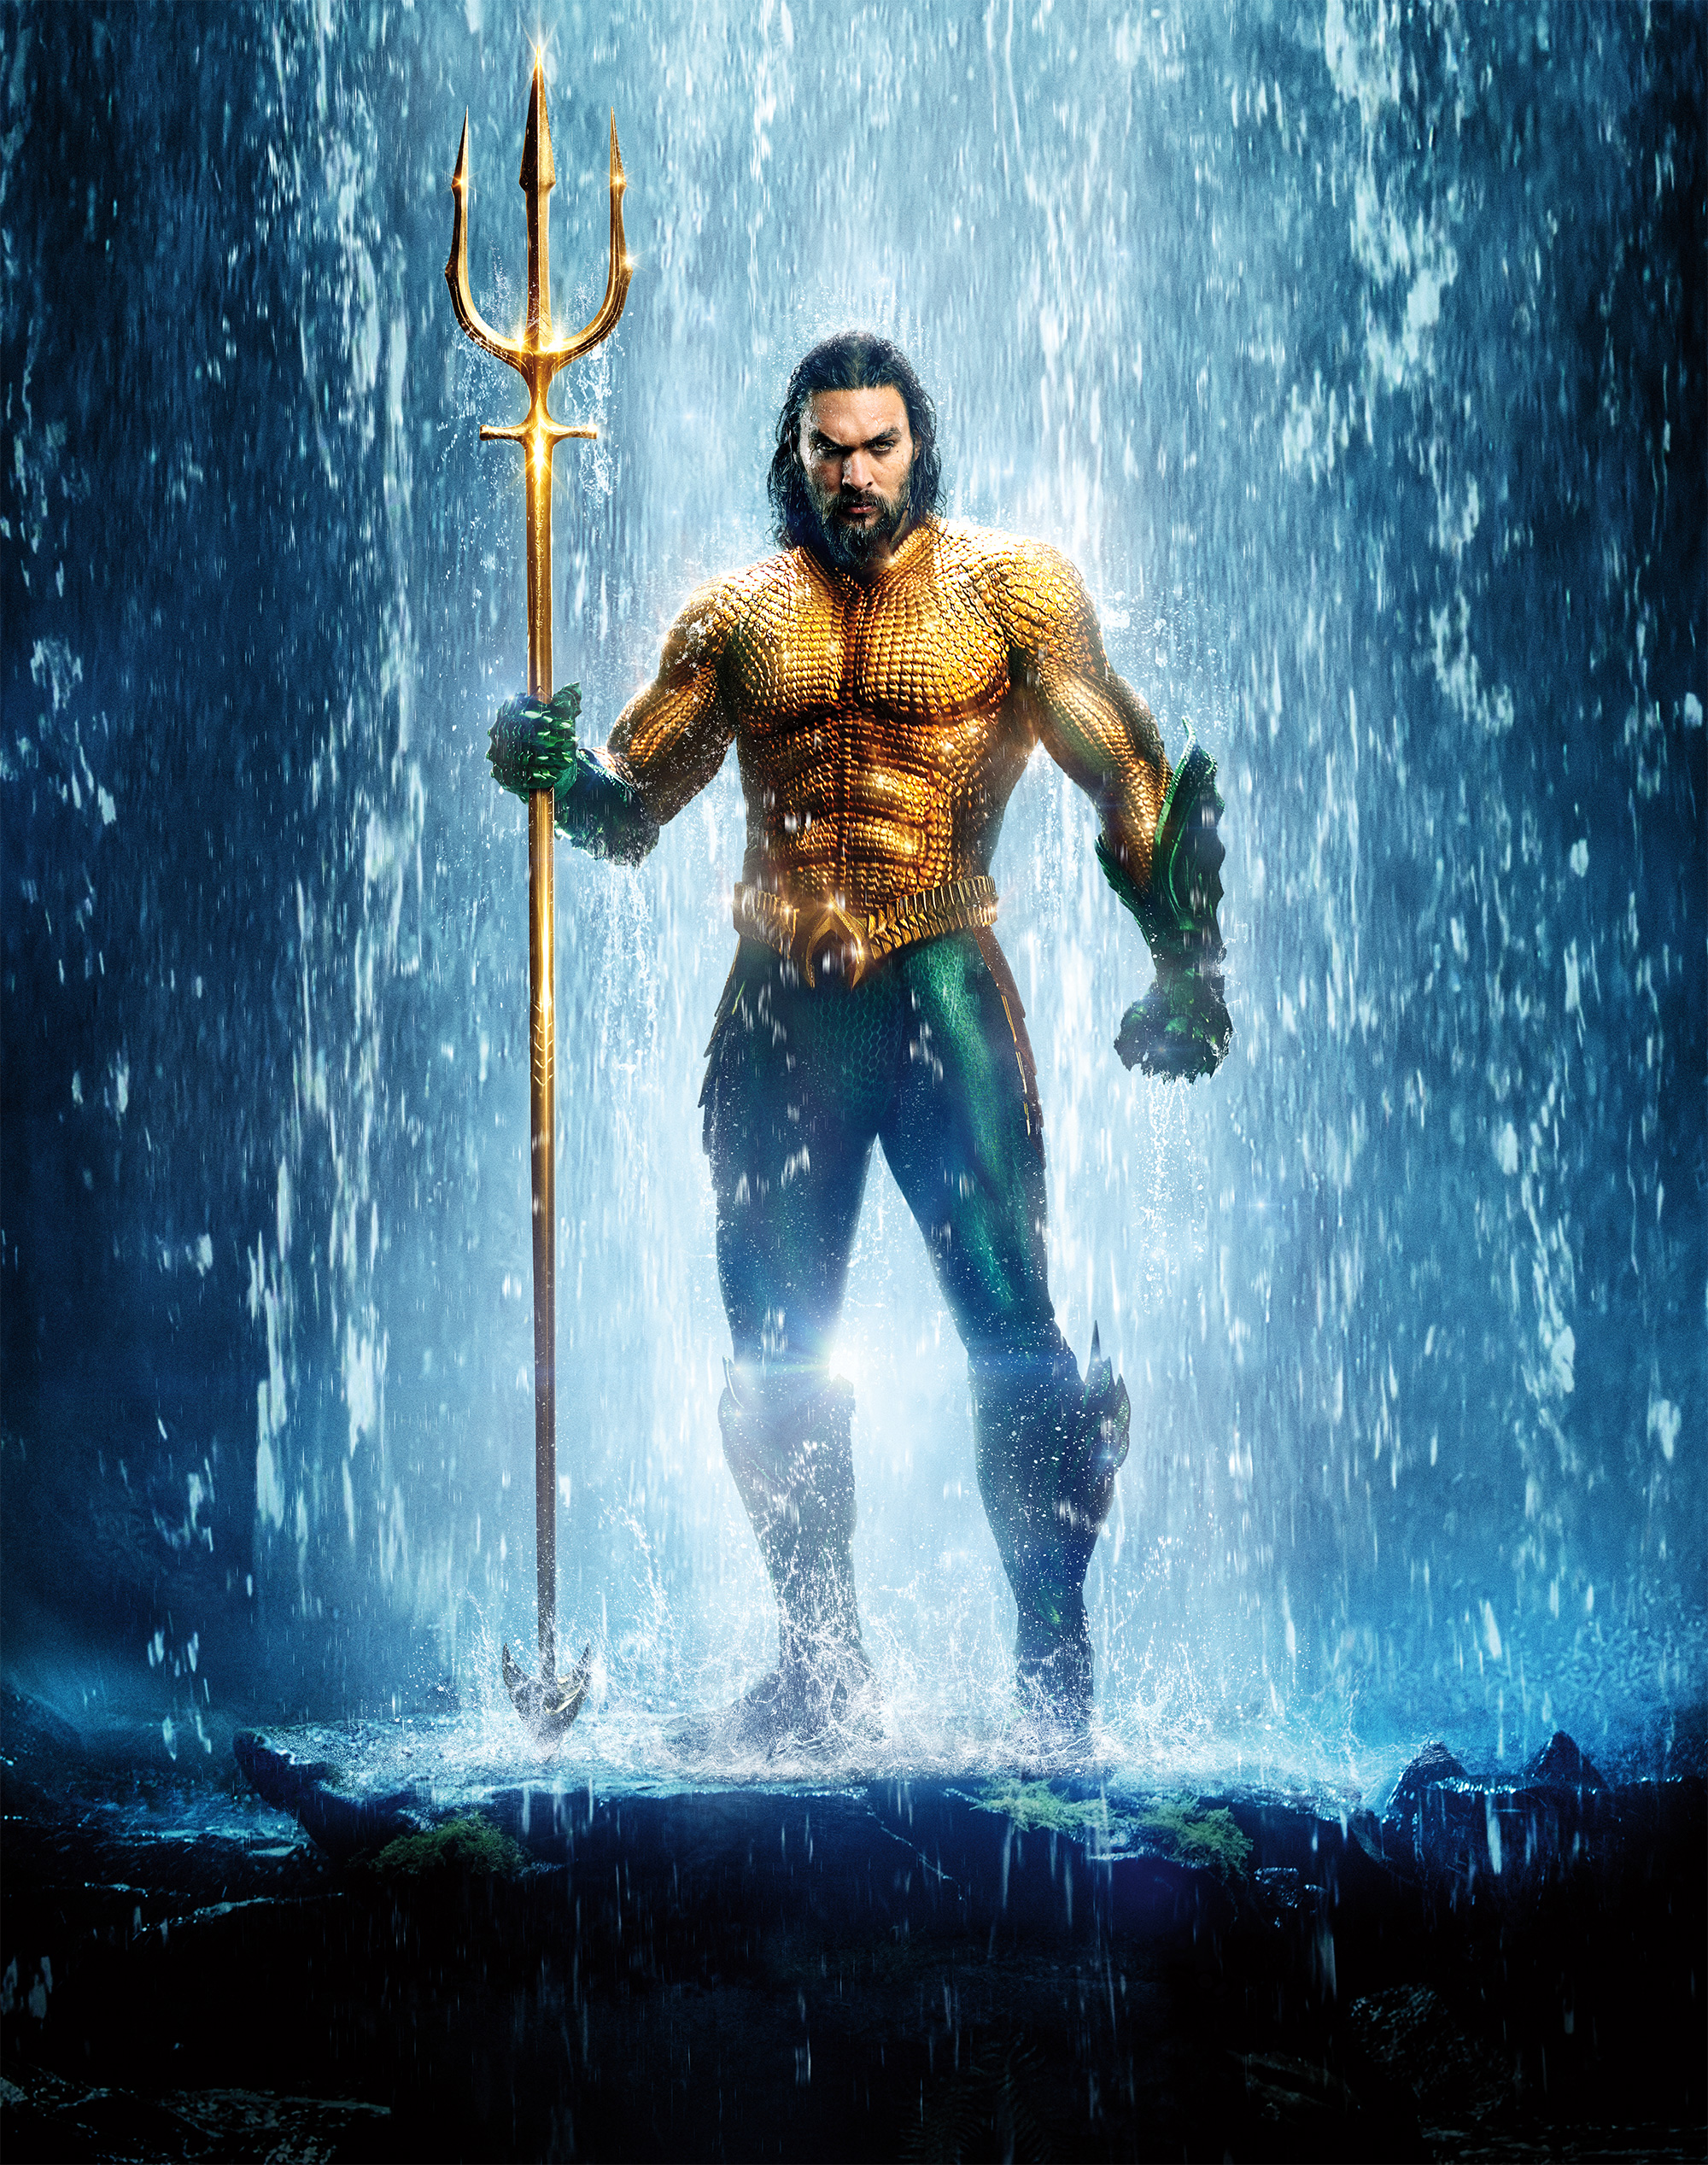 Does Aquaman remind us of a modern day Lord Shiva?